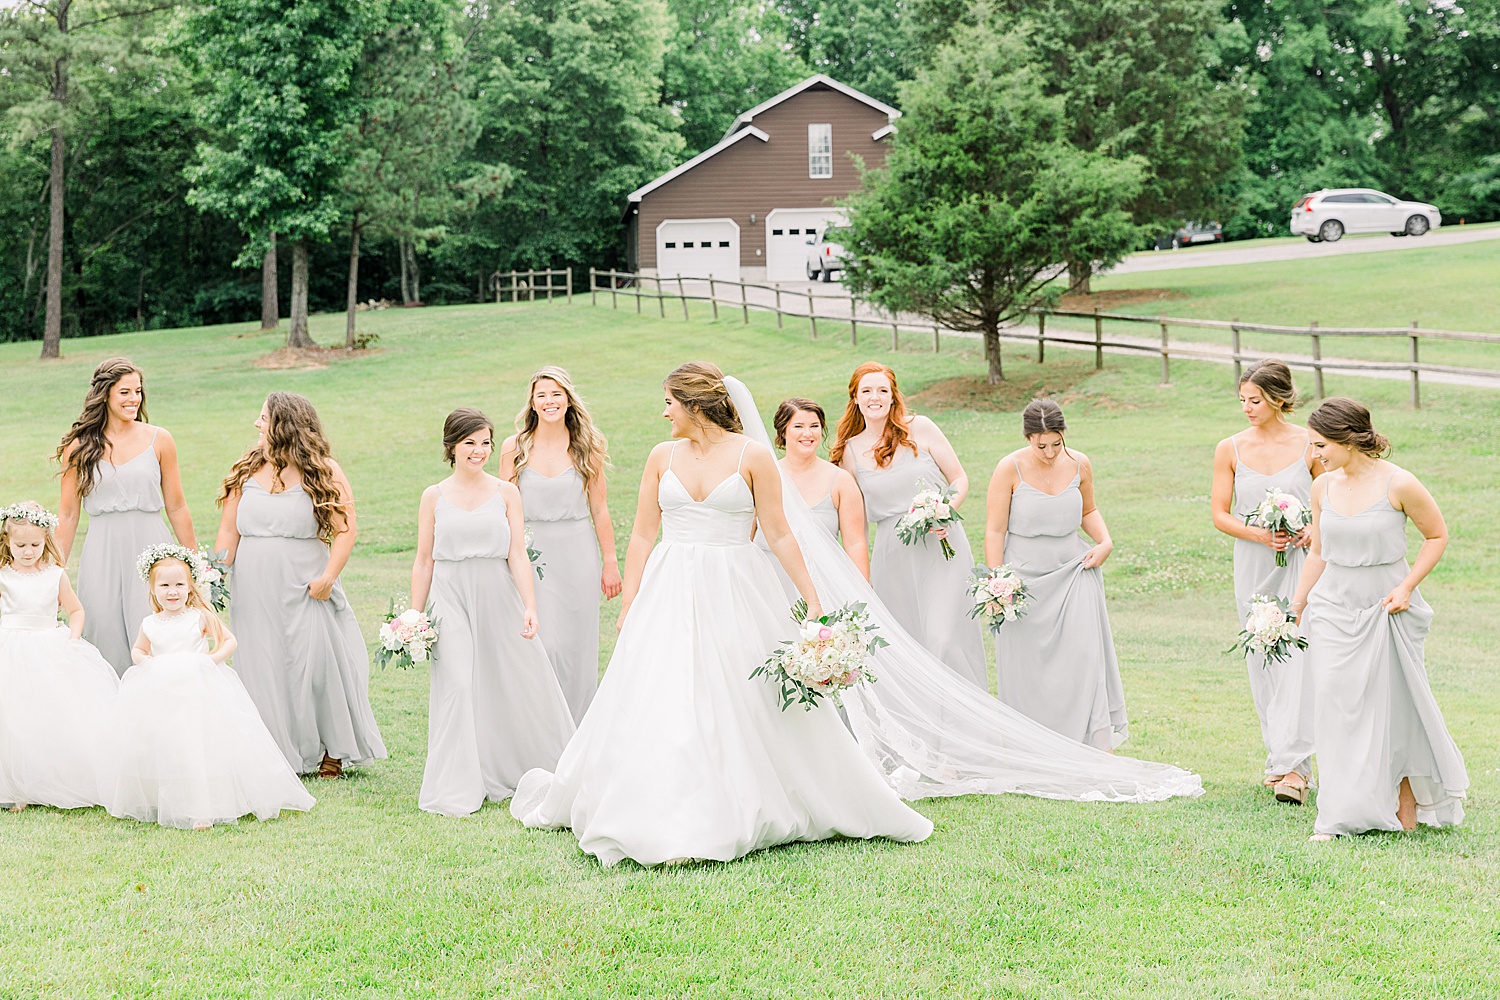 candid moment of bride with bridal party before AL wedding ceremony captured by Chelsea Morton Photography